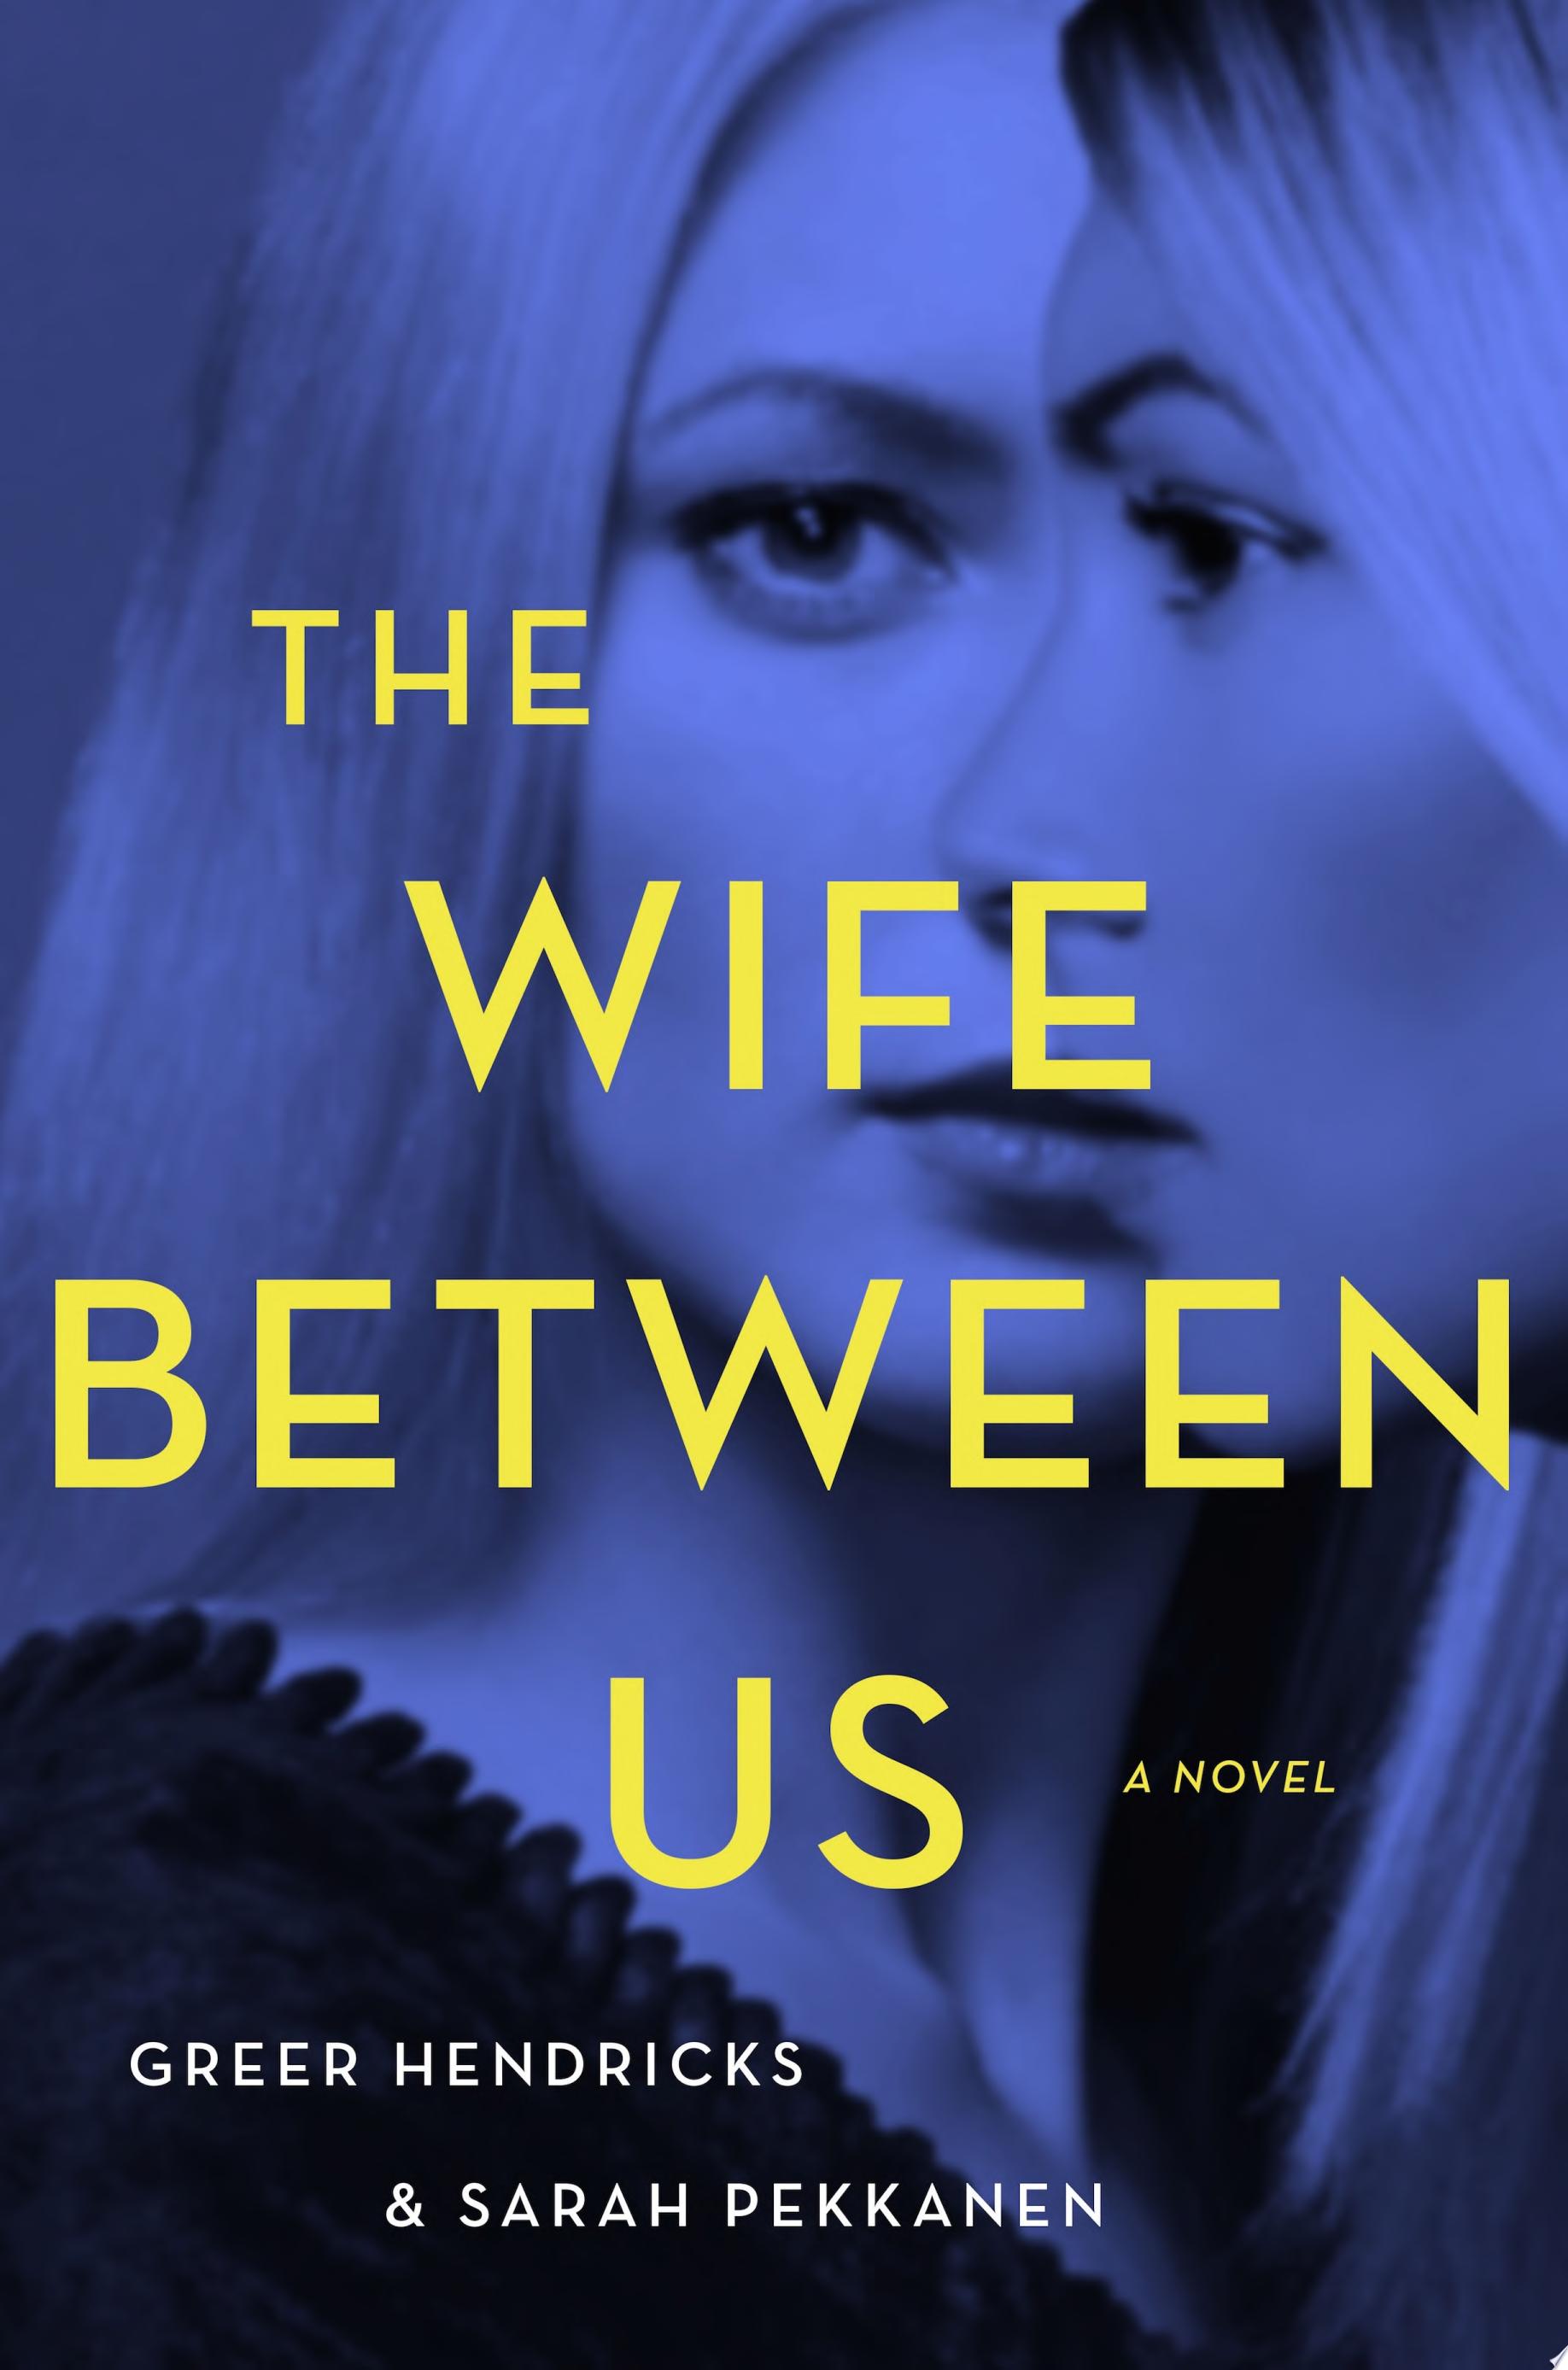 Image for "The Wife Between Us"